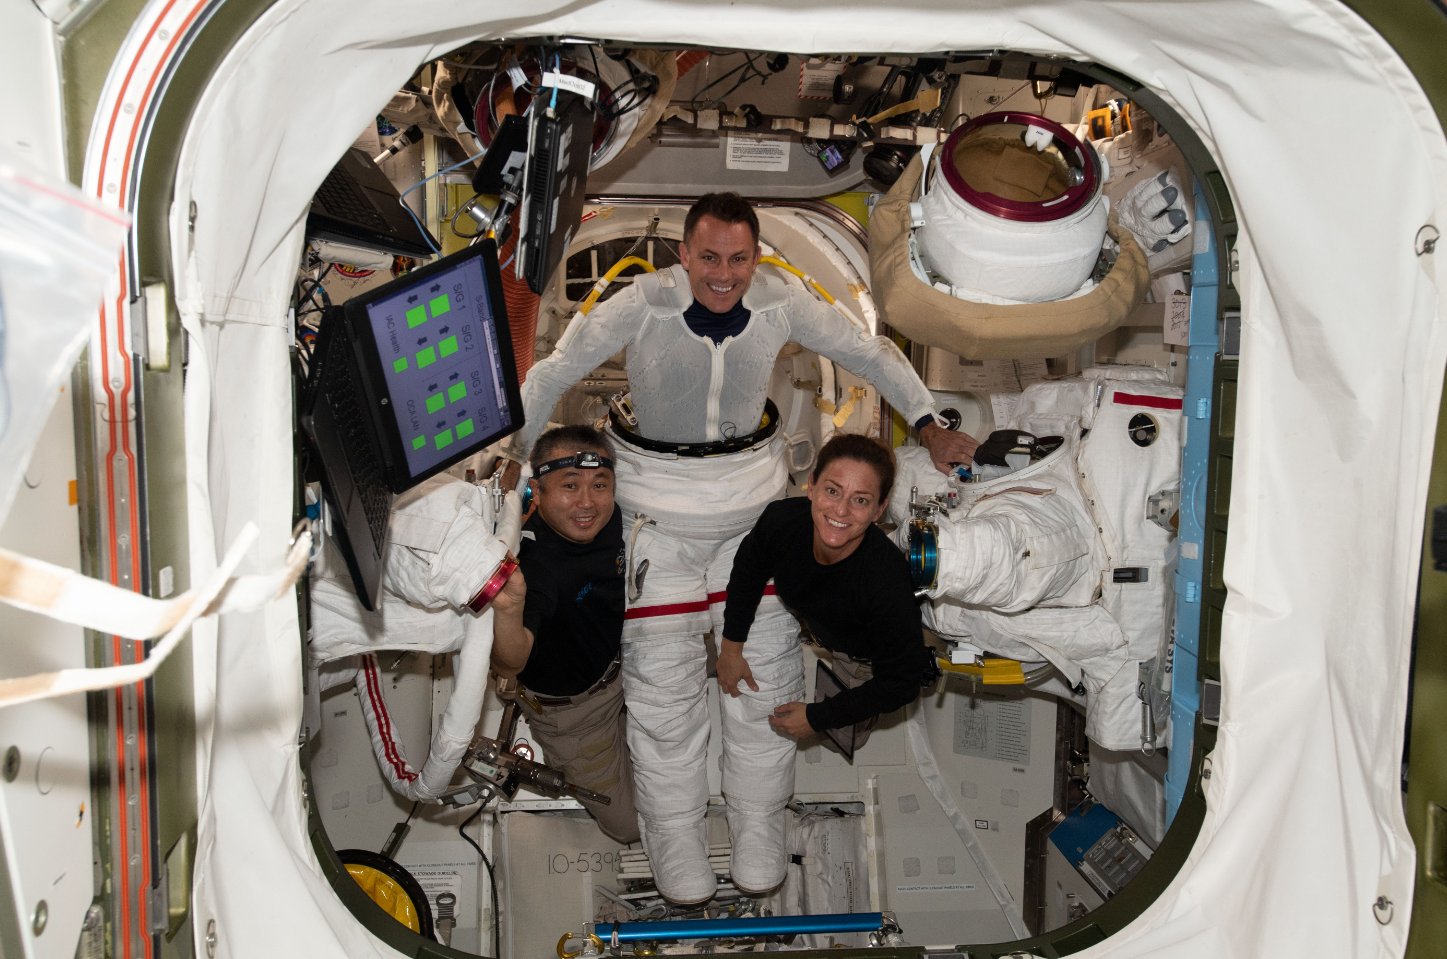 NASA astronaut Josh Cassada (center) is pictured trying on an Extravehicular Mobility Unit, or spacesuit, with assistance from astronaut Koichi Wakata (left) of the Japan Aerospace Exploration Agency and NASA astronaut Nicole Mann (right) inside the International Space Station's Quest airlock. Credits: NASA/Josh Cassada